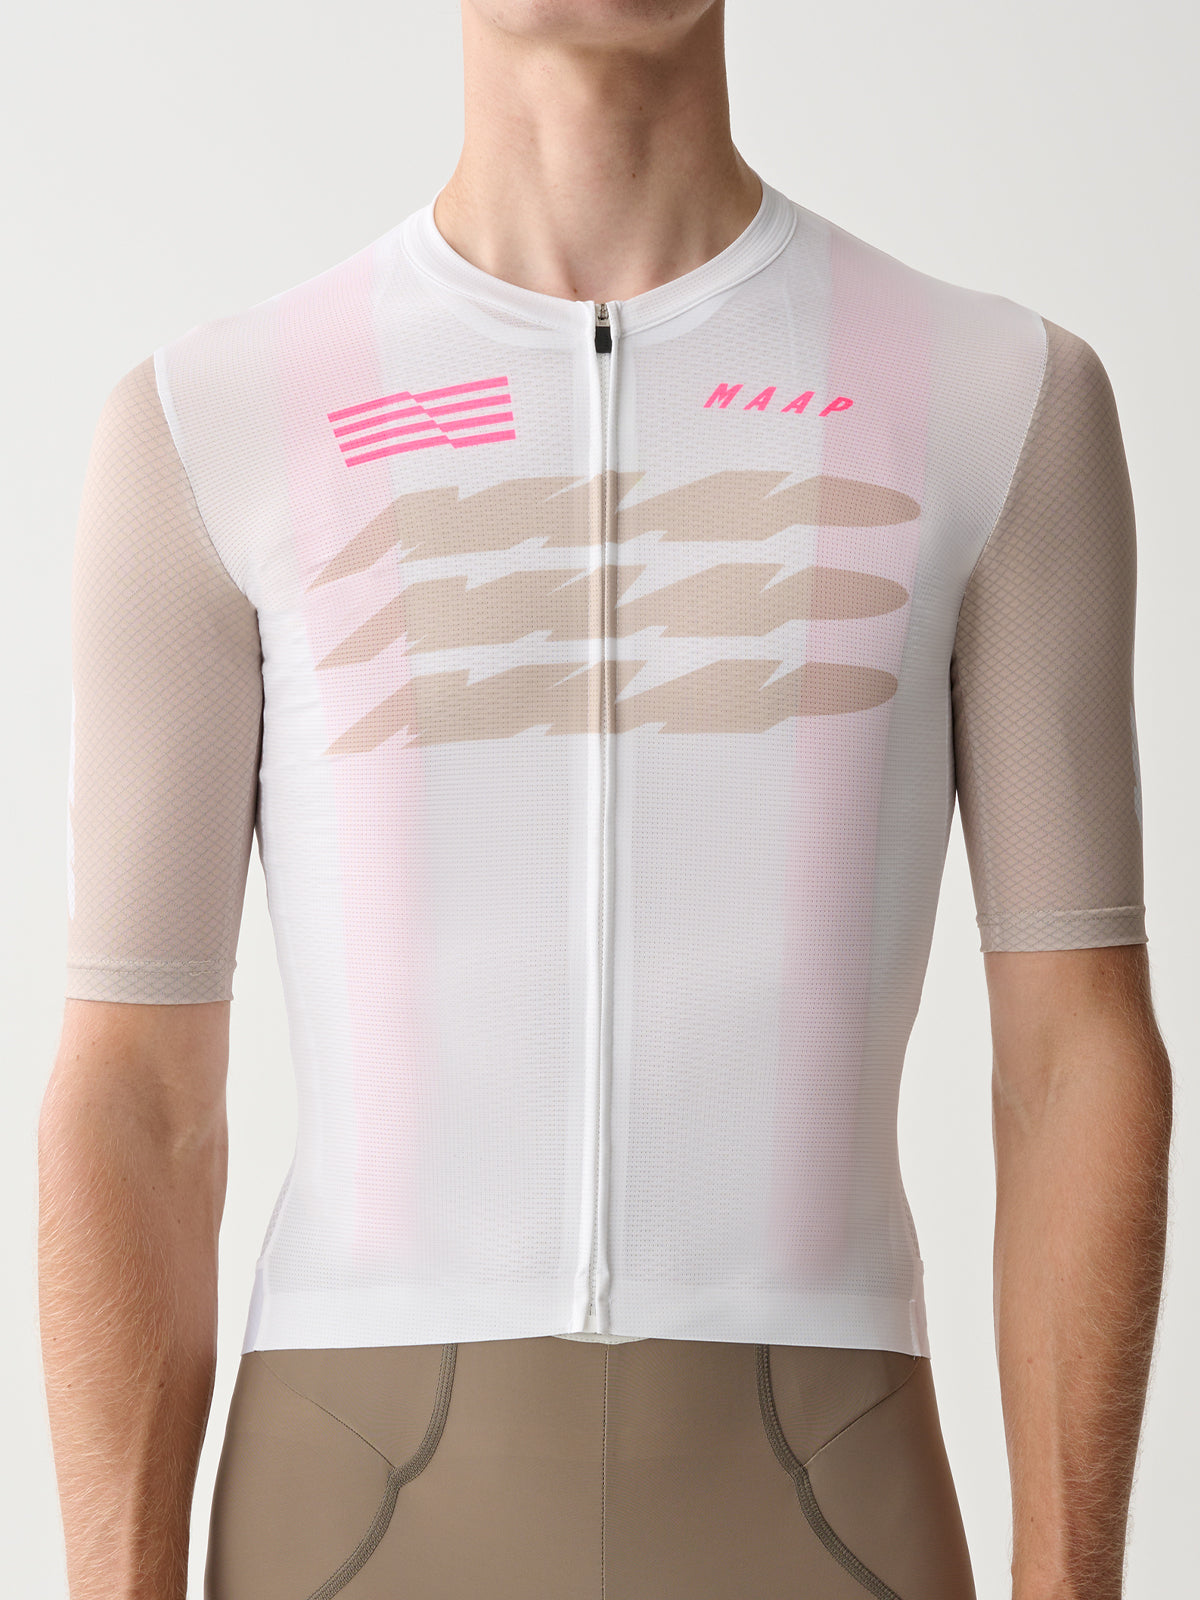 ECLIPSE PRO AIR JERSEY 2.0 - WHITE